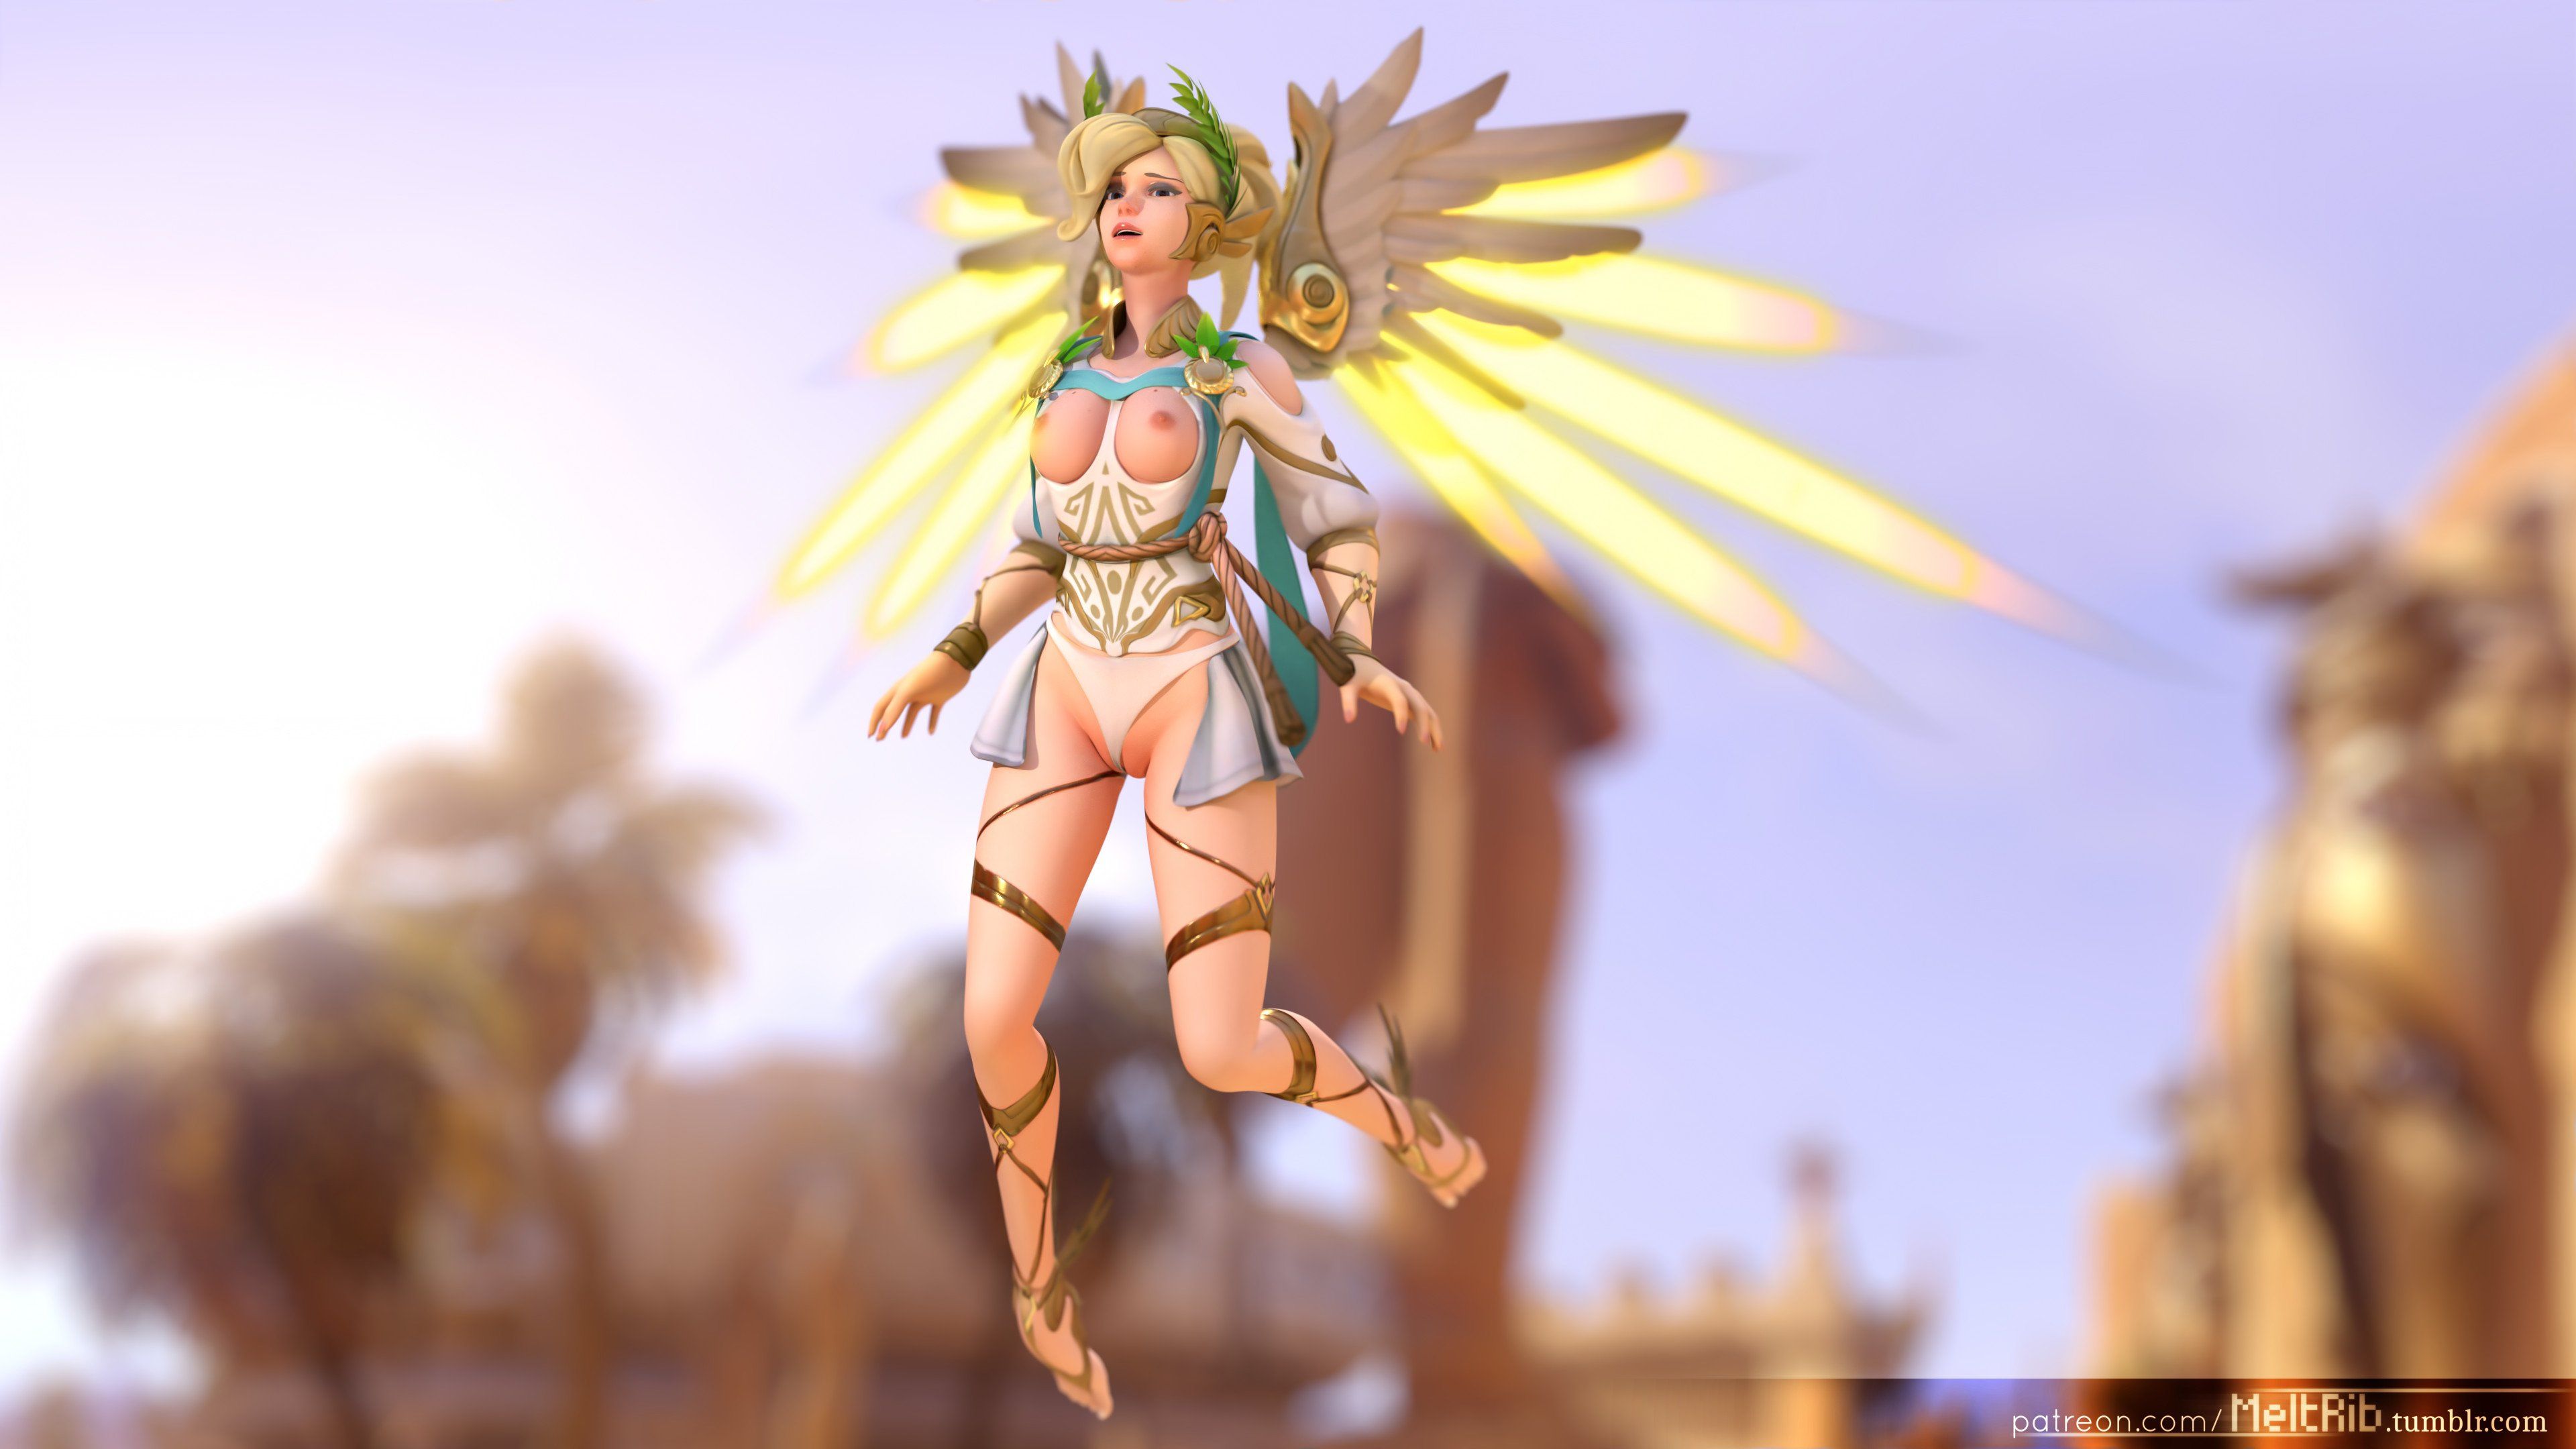 Winged Victory Mercy Riding Overwatch (Blender Animation W/Sound).